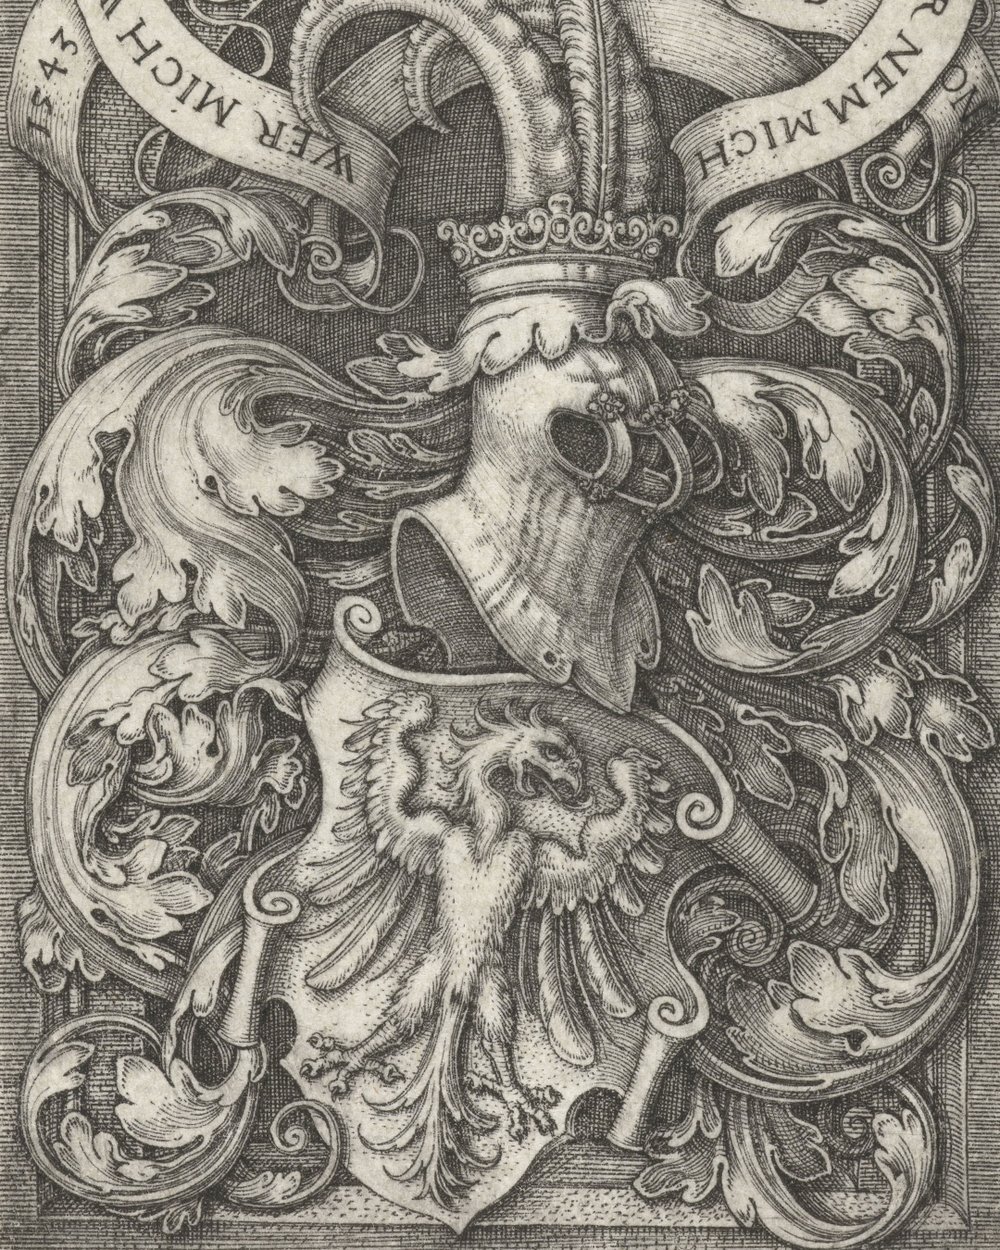 ''Weapon with a rooster on a shield'' (1543)